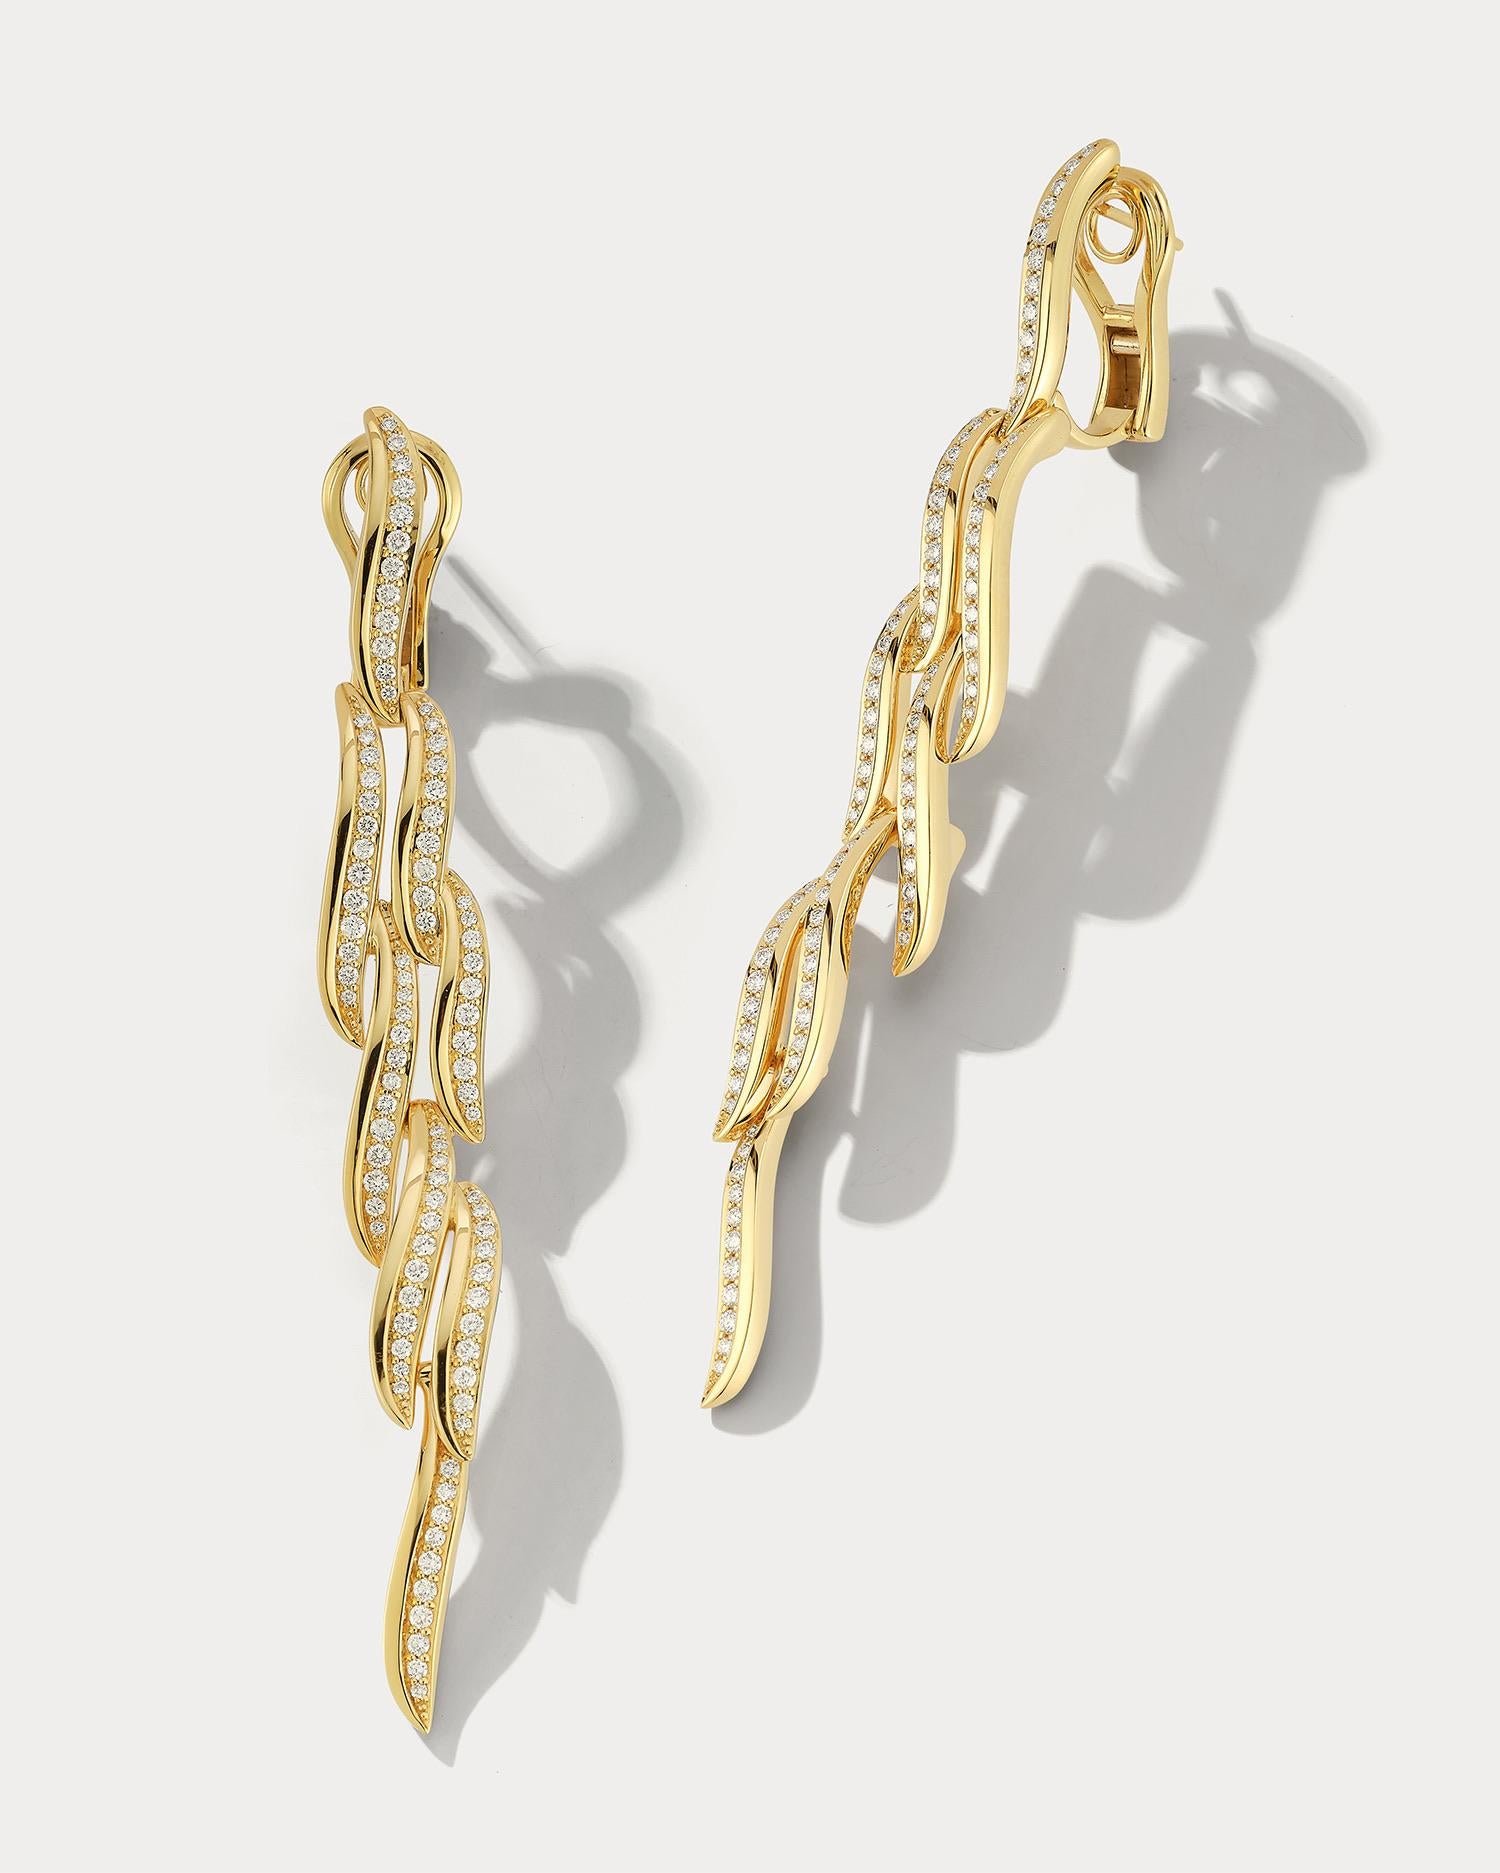 These stunning drop earrings are crafted from high-quality 18k yellow gold and feature a unique wave design with shimmering diamonds. The waves of the design create a fluid and graceful appearance that is truly eye-catching. The diamonds are set in